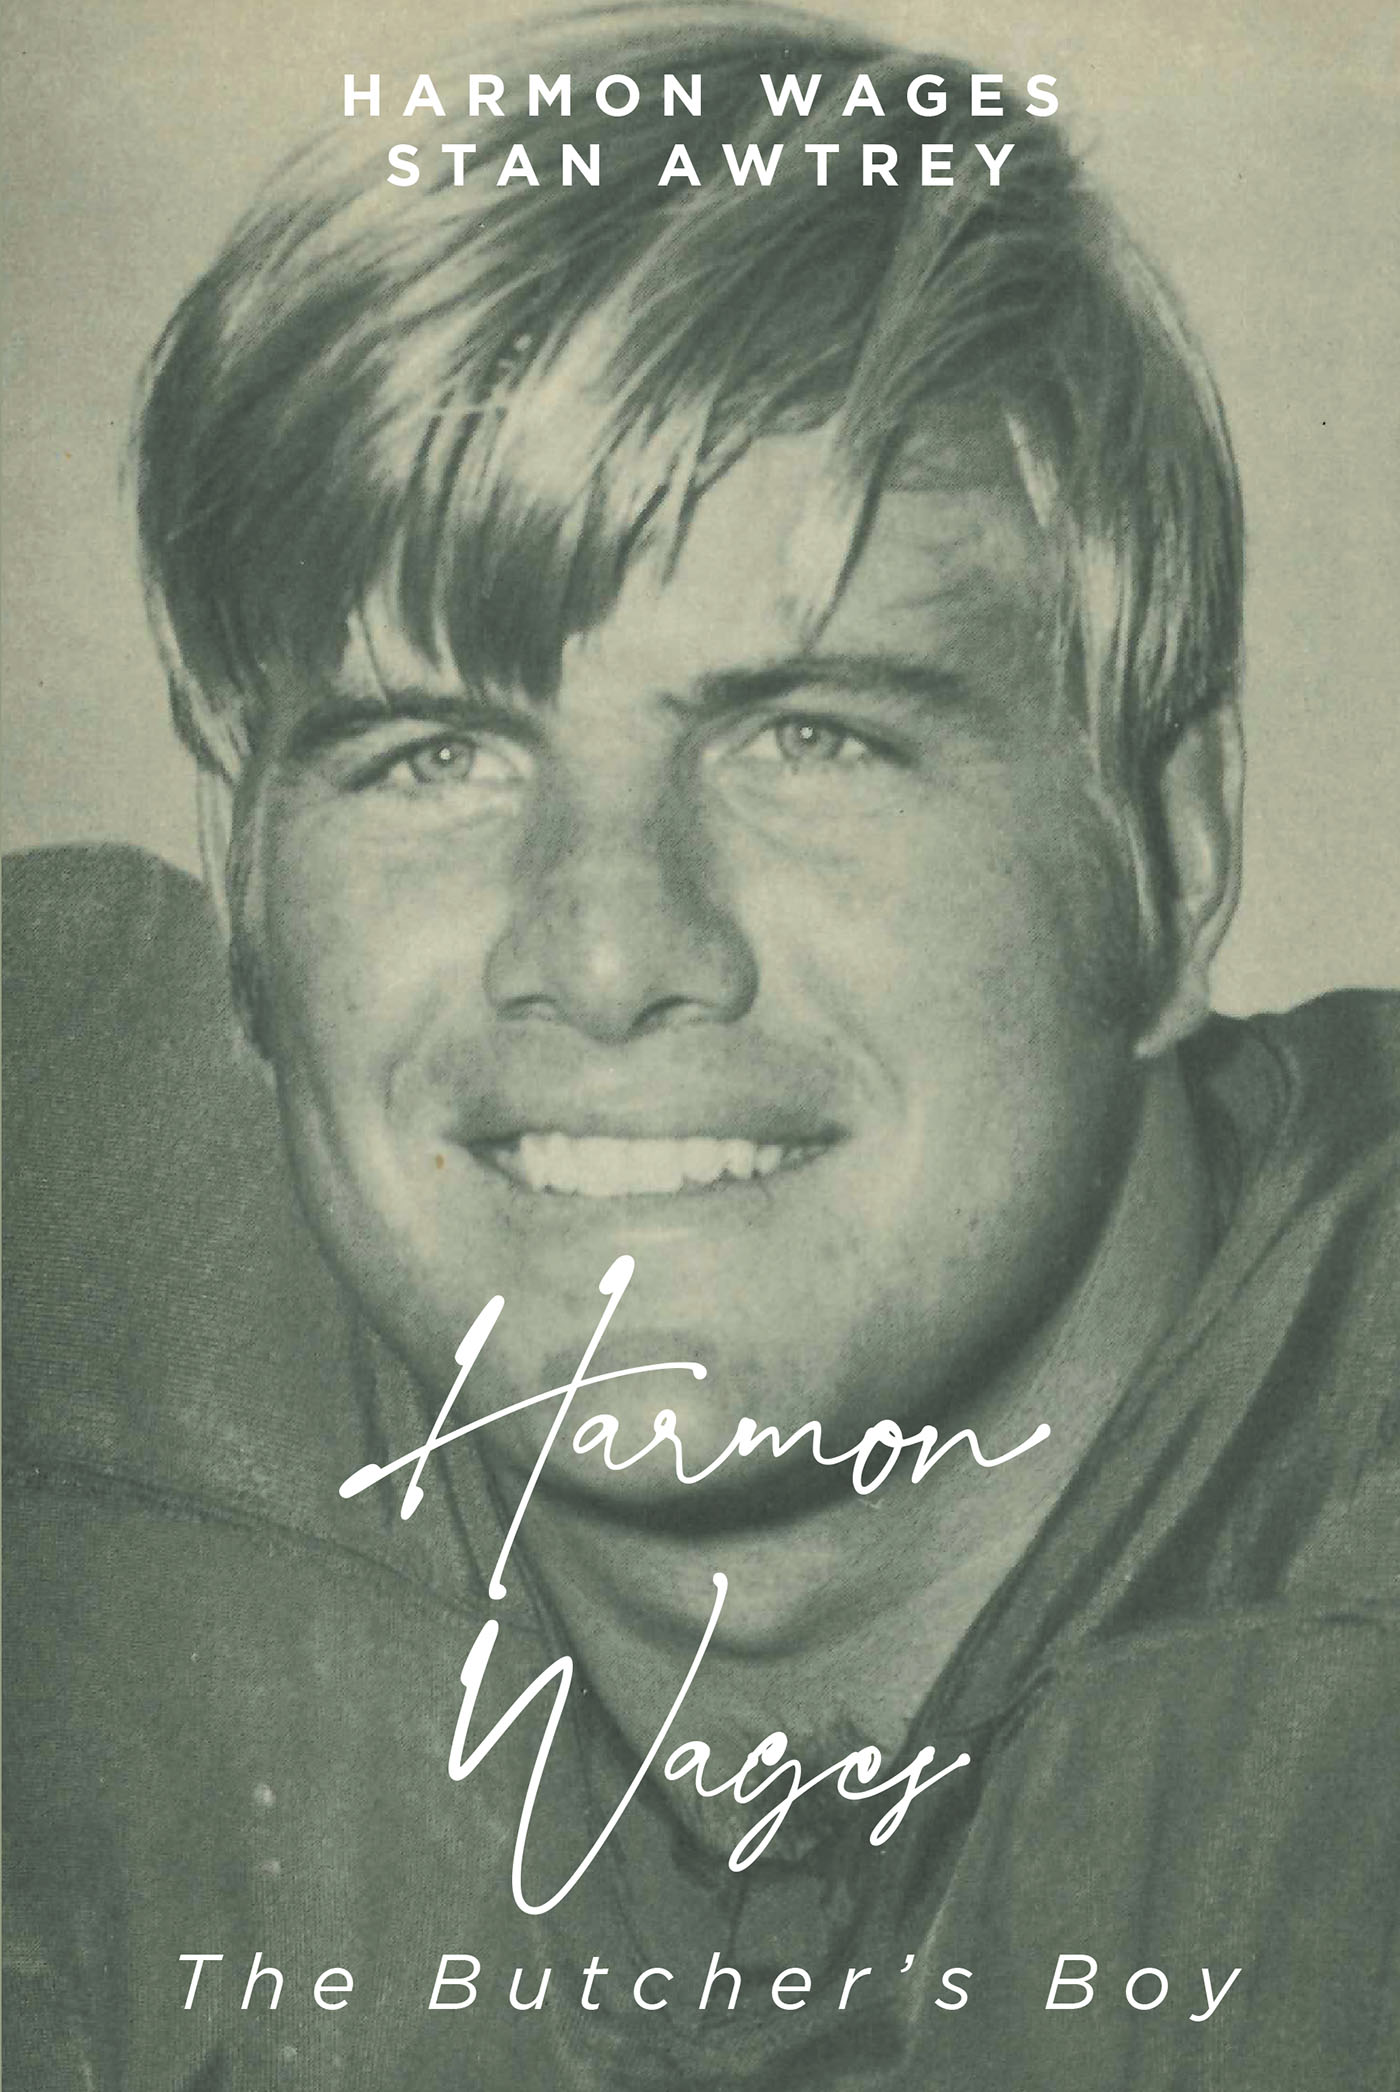 "Harmon Wages: The Butcher’s Boy" is a Compelling Autobiography of a Football Legend Turned TV Sportscaster